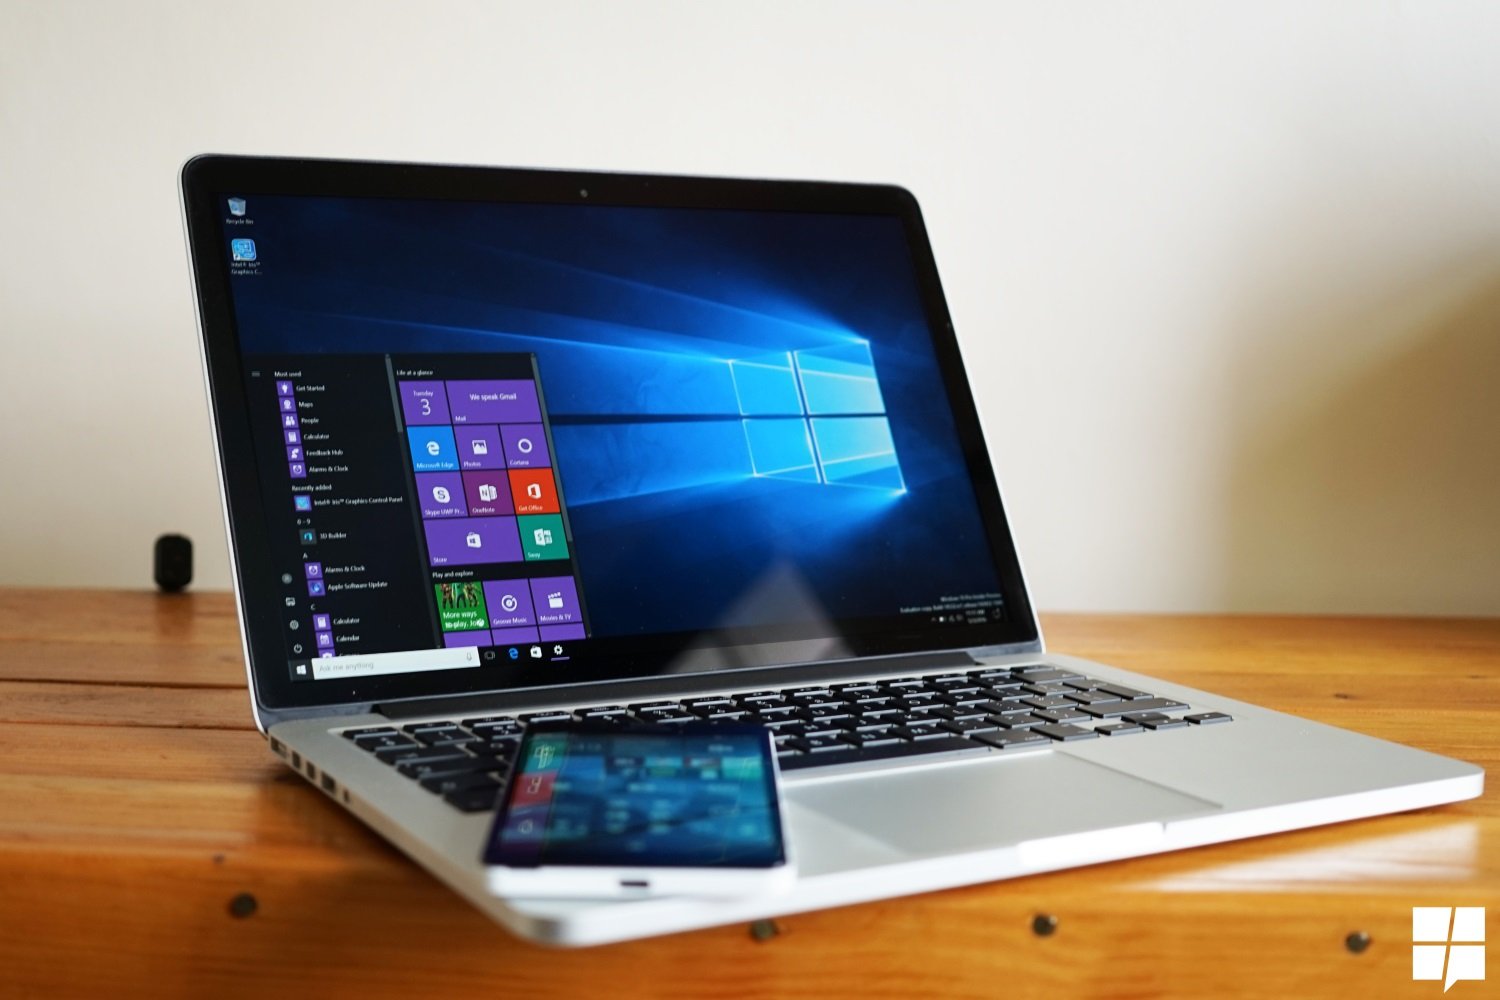 “Get Windows 10” now has an upgrade countdown timer